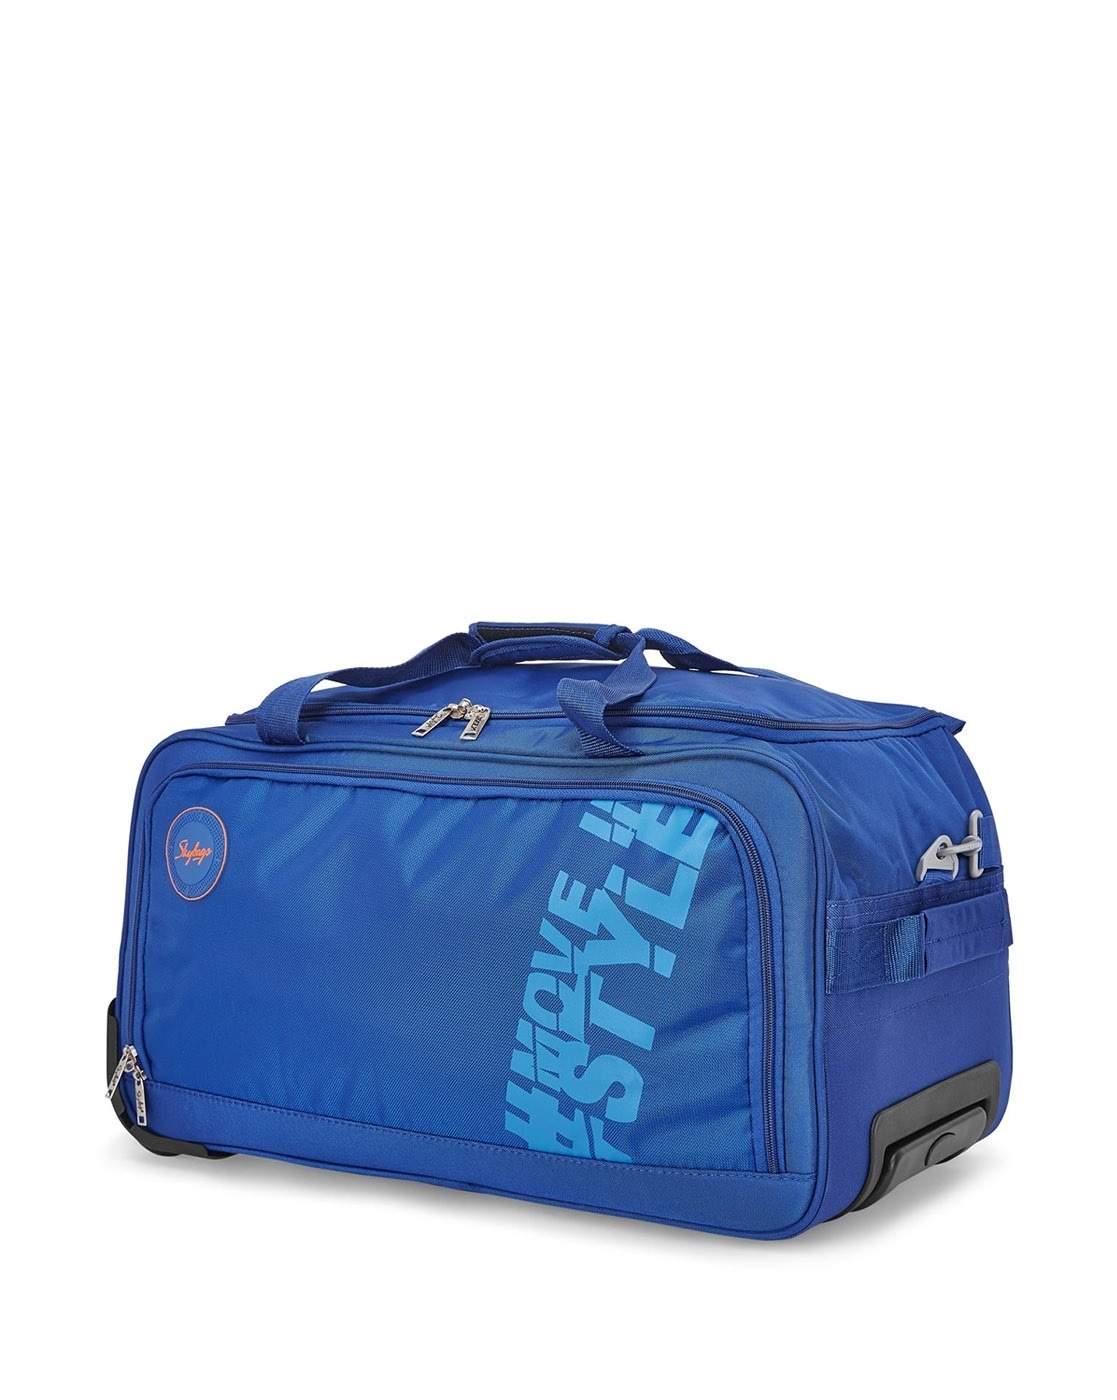 Trolley & Duffle Bags - Luggage - Bags & Accessories - Home & Kitchen